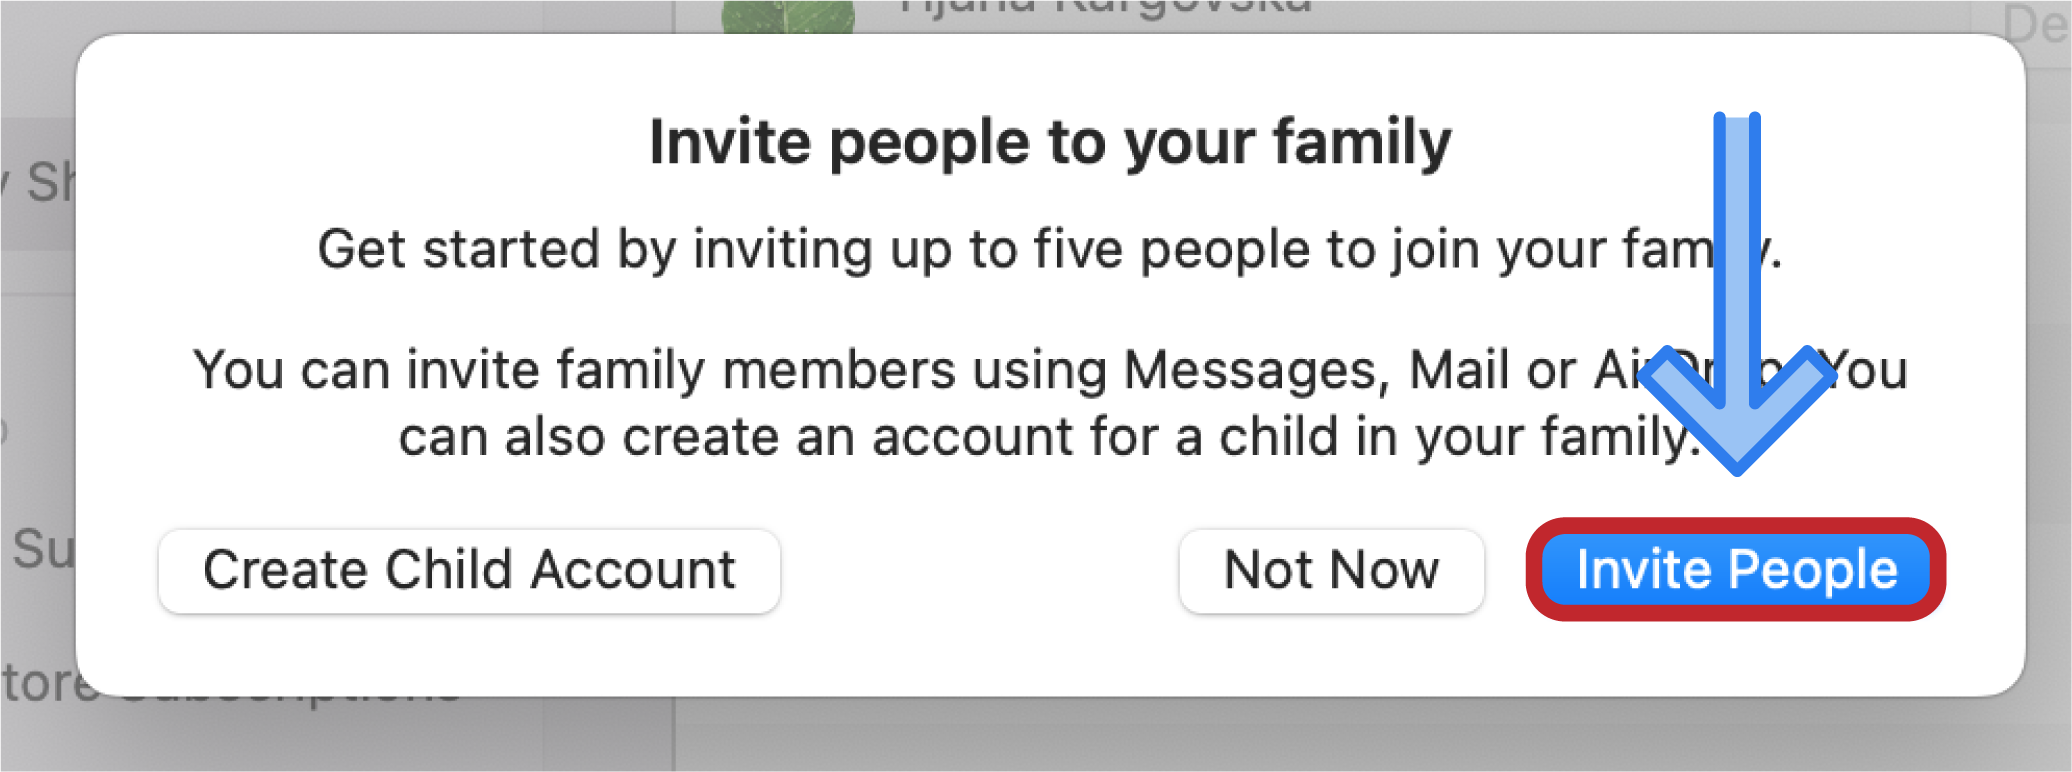 3-family-sharing-settings-invite-people-popup